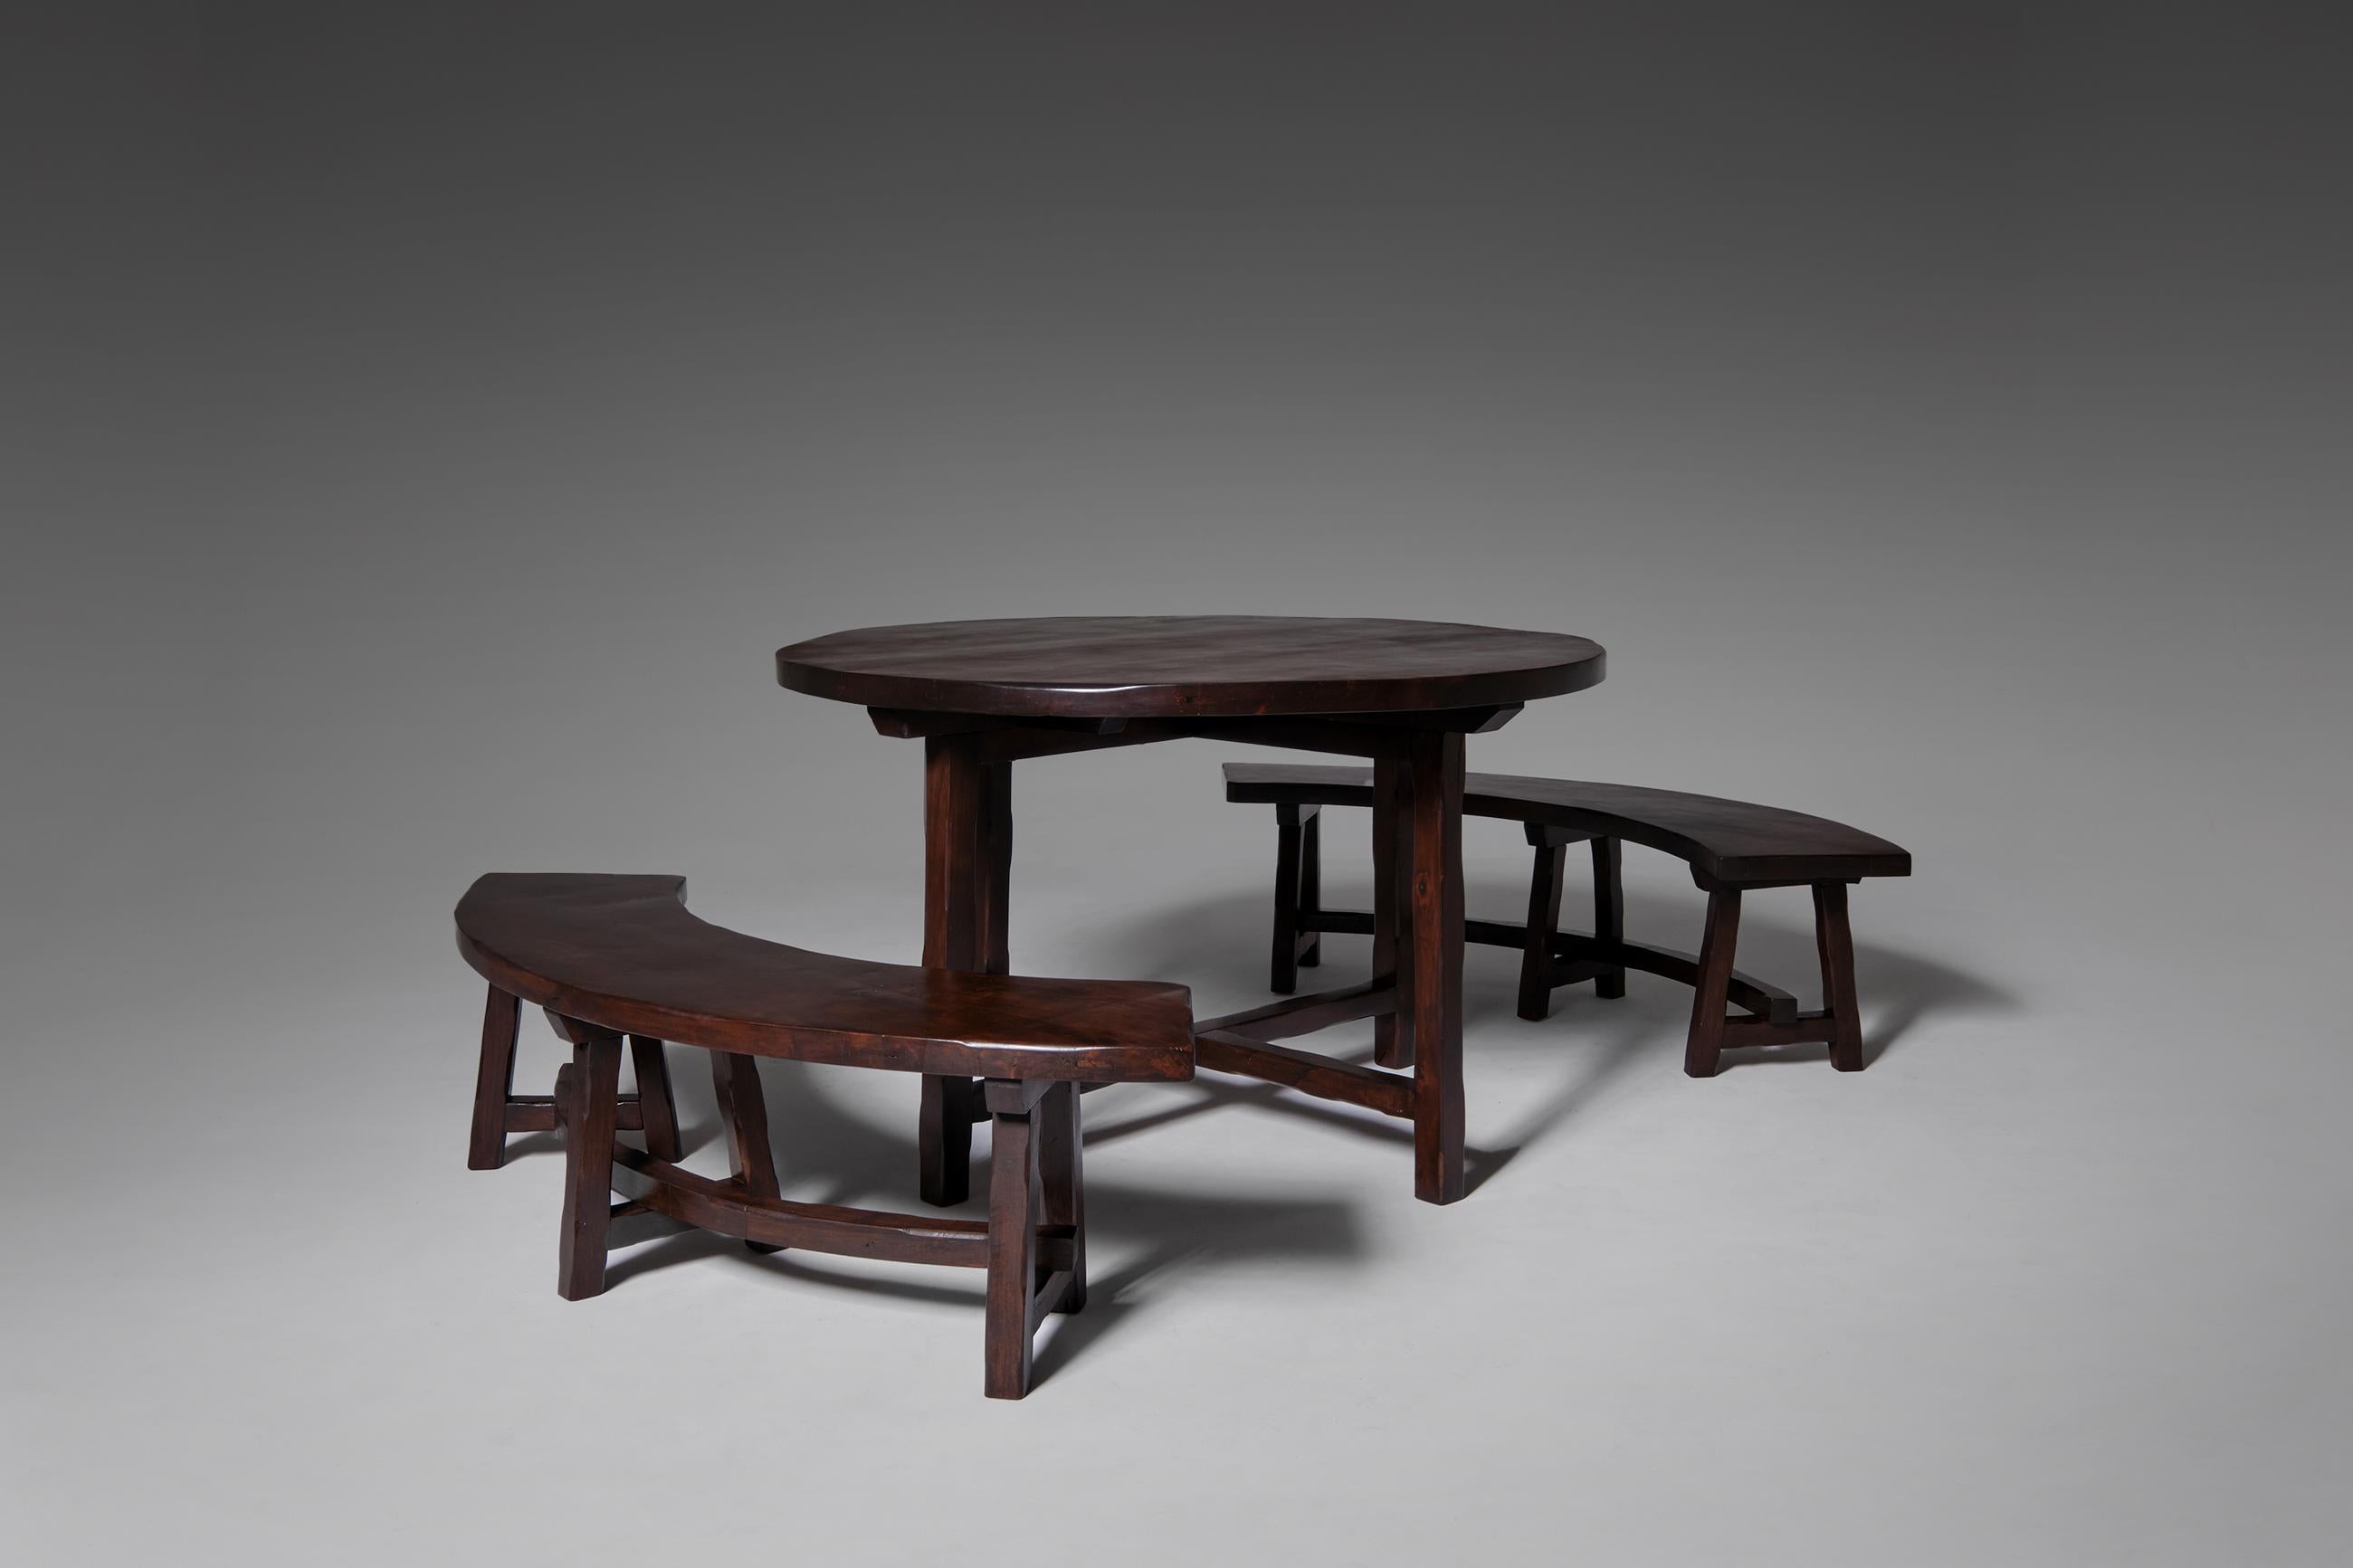 Primitive stained ash wooden table and two curved benches, France, 1970's. The set is constructed out of solid dark stained ash wood with nice warm tones. Every single element is carved by hand, this causes a very nice artisan character. Every bench